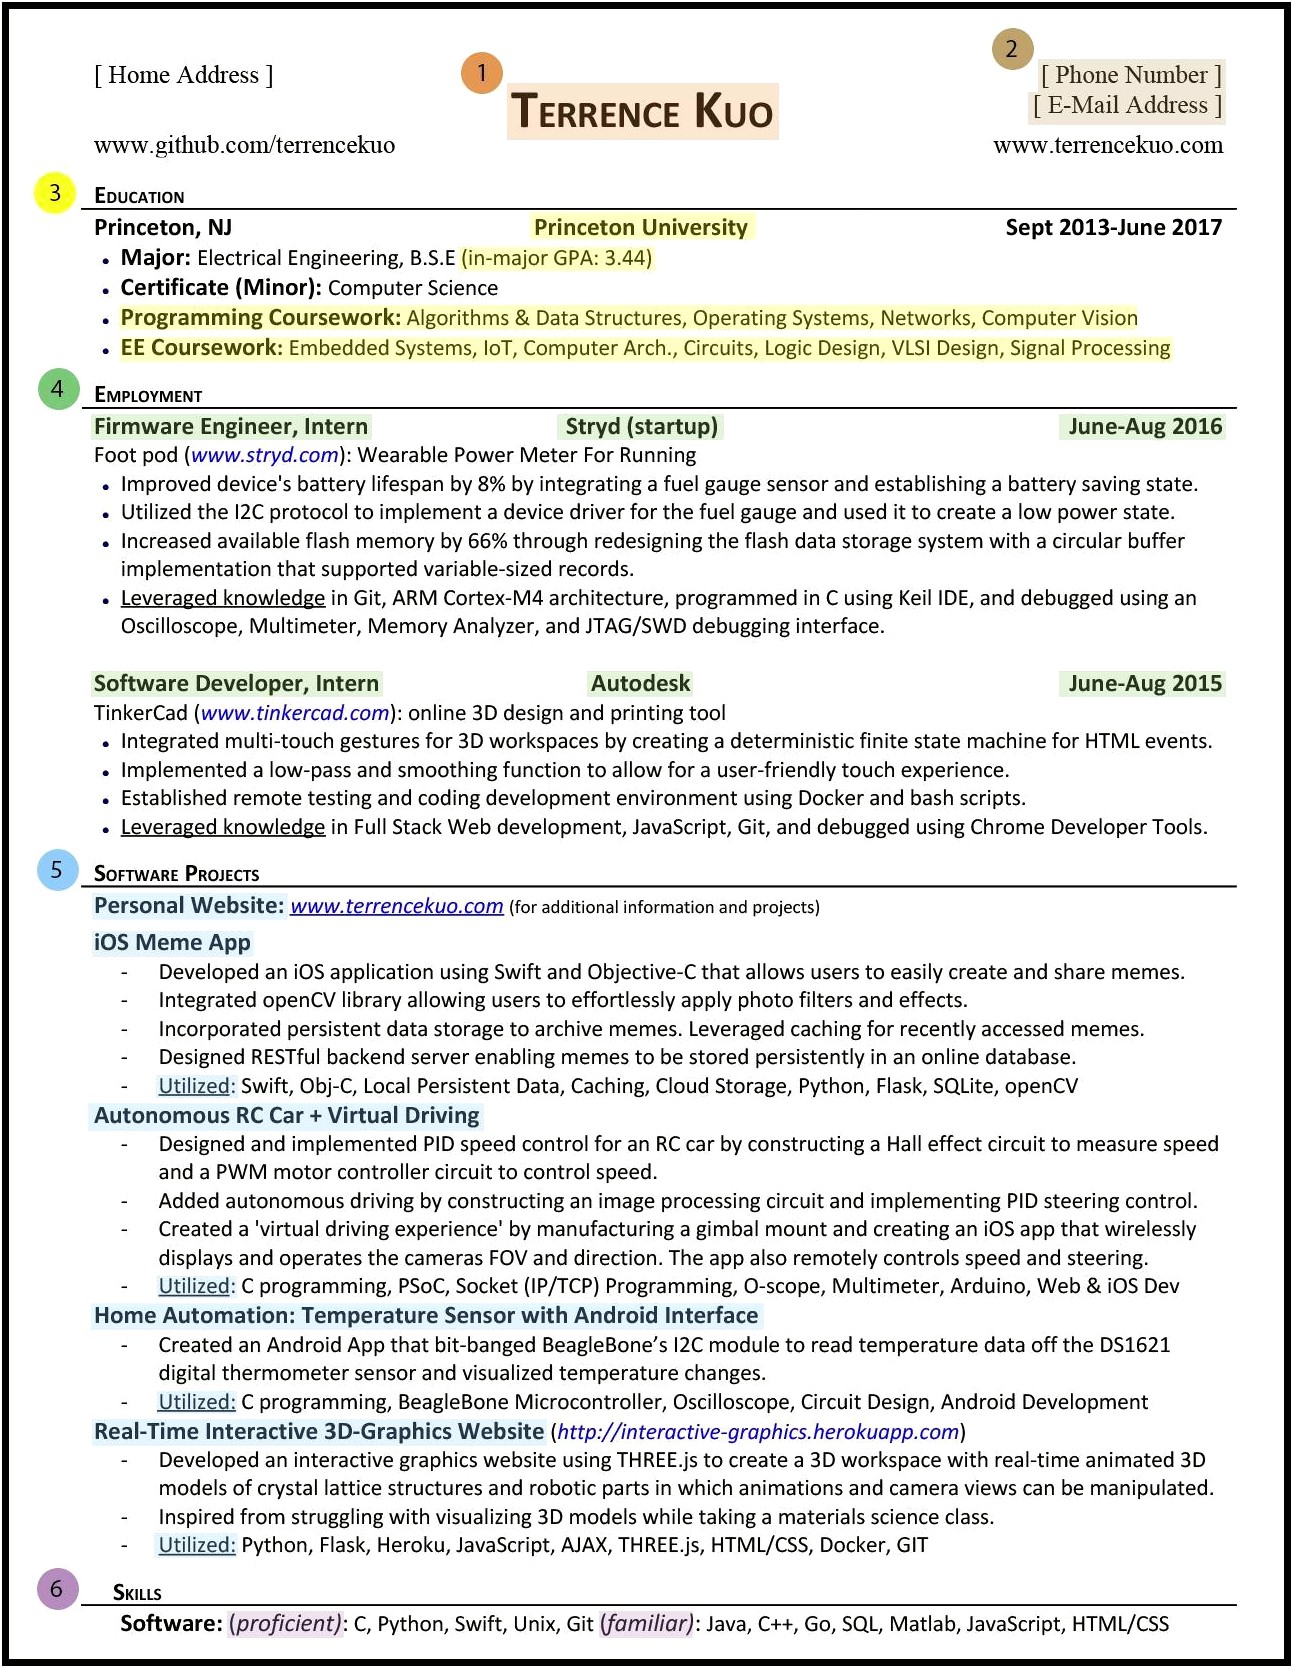 Resume Skills And Interests Section